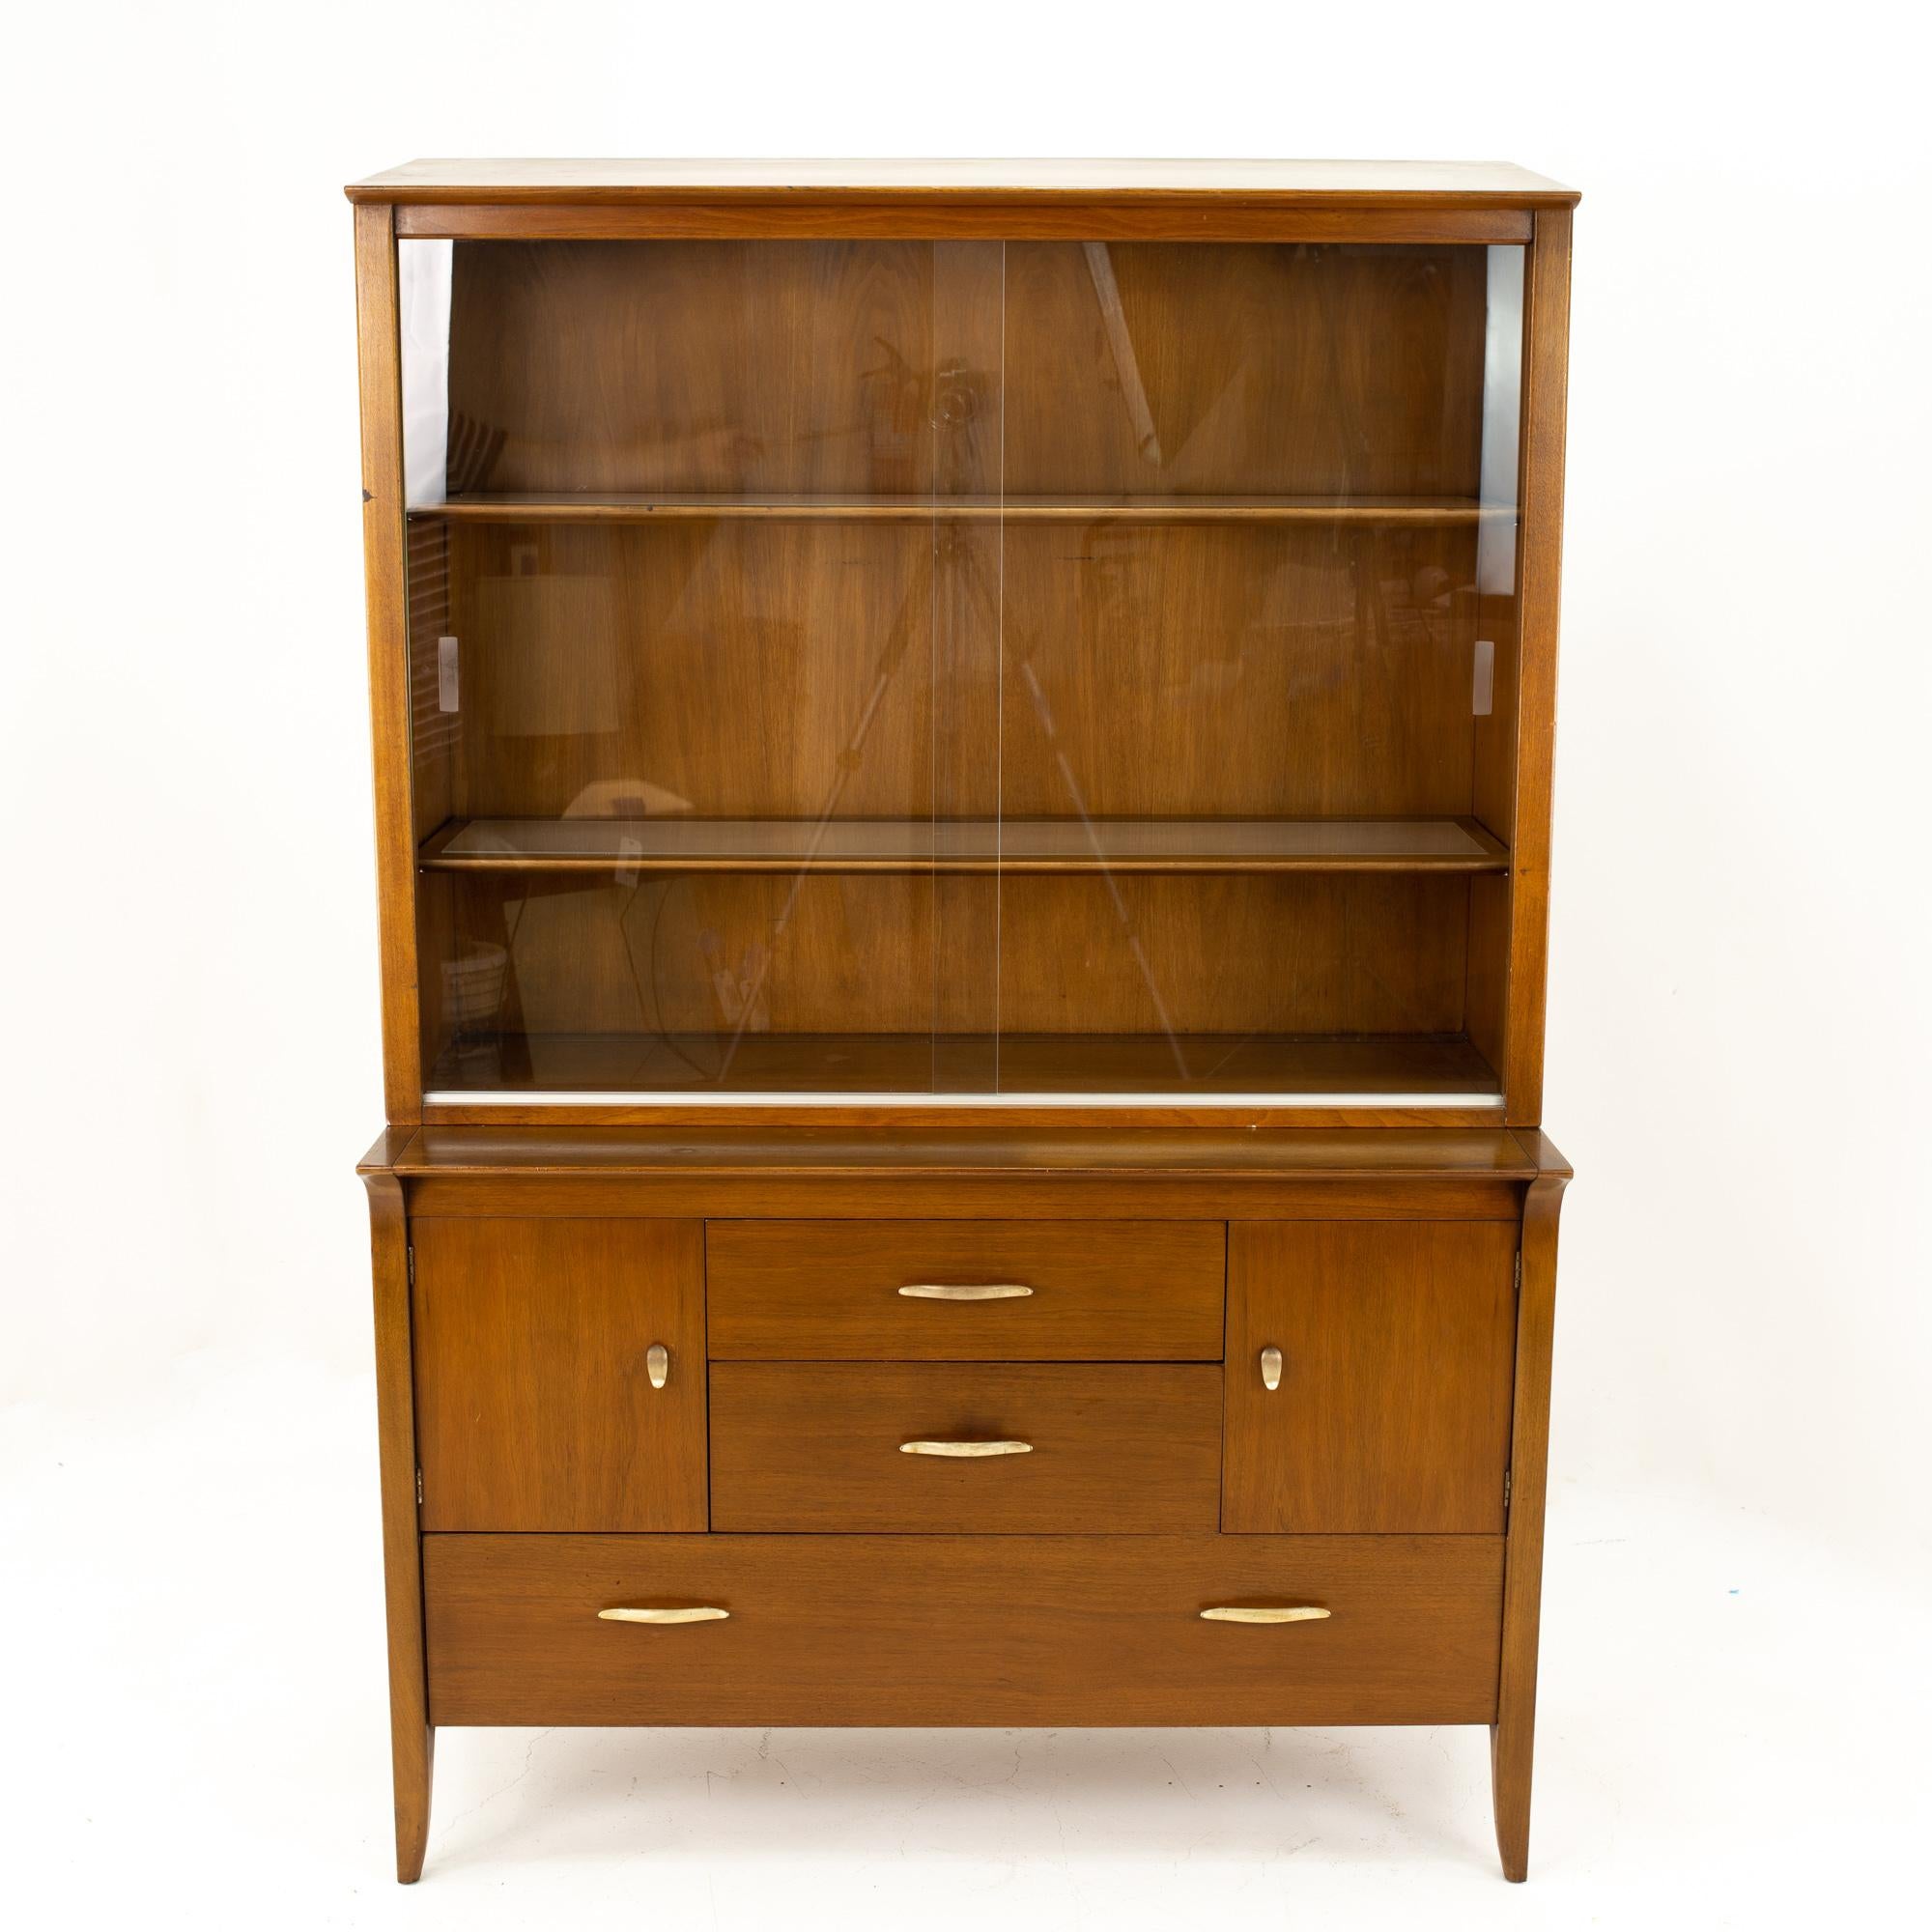 John Van Koert for Drexel mid century two piece china hutch sideboard
China cabinet measures: 48 wide x 21 deep x 72 high

?All pieces of furniture can be had in what we call restored vintage condition. That means the piece is restored upon